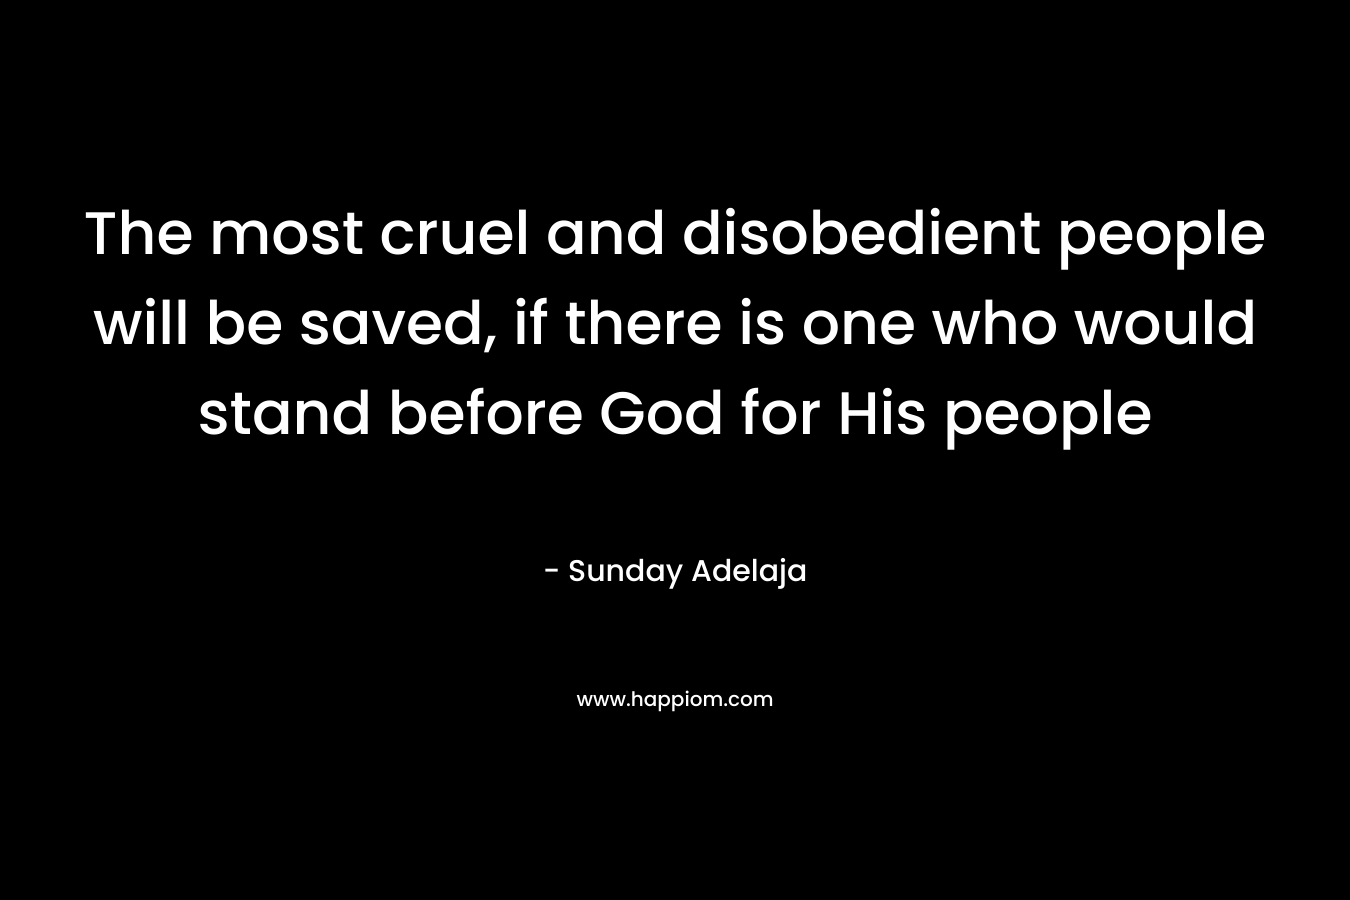 The most cruel and disobedient people will be saved, if there is one who would stand before God for His people